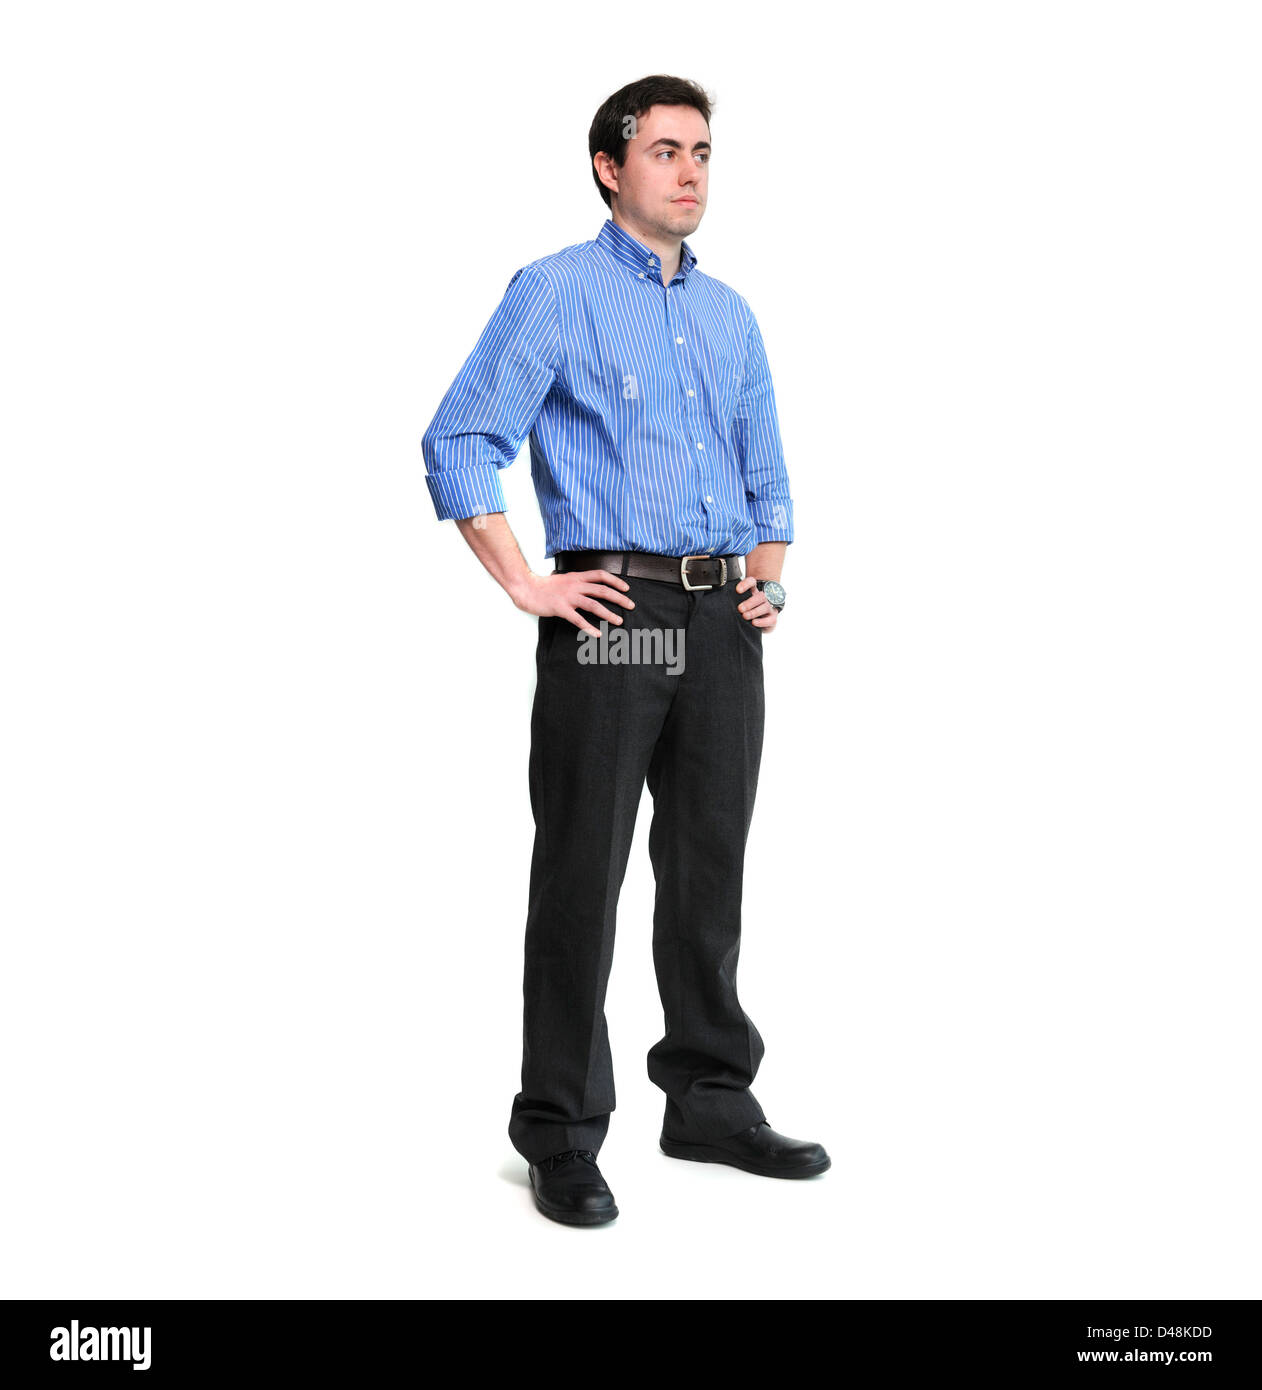 Full length portrait of a man with hands on his hips isolated on white background Stock Photo